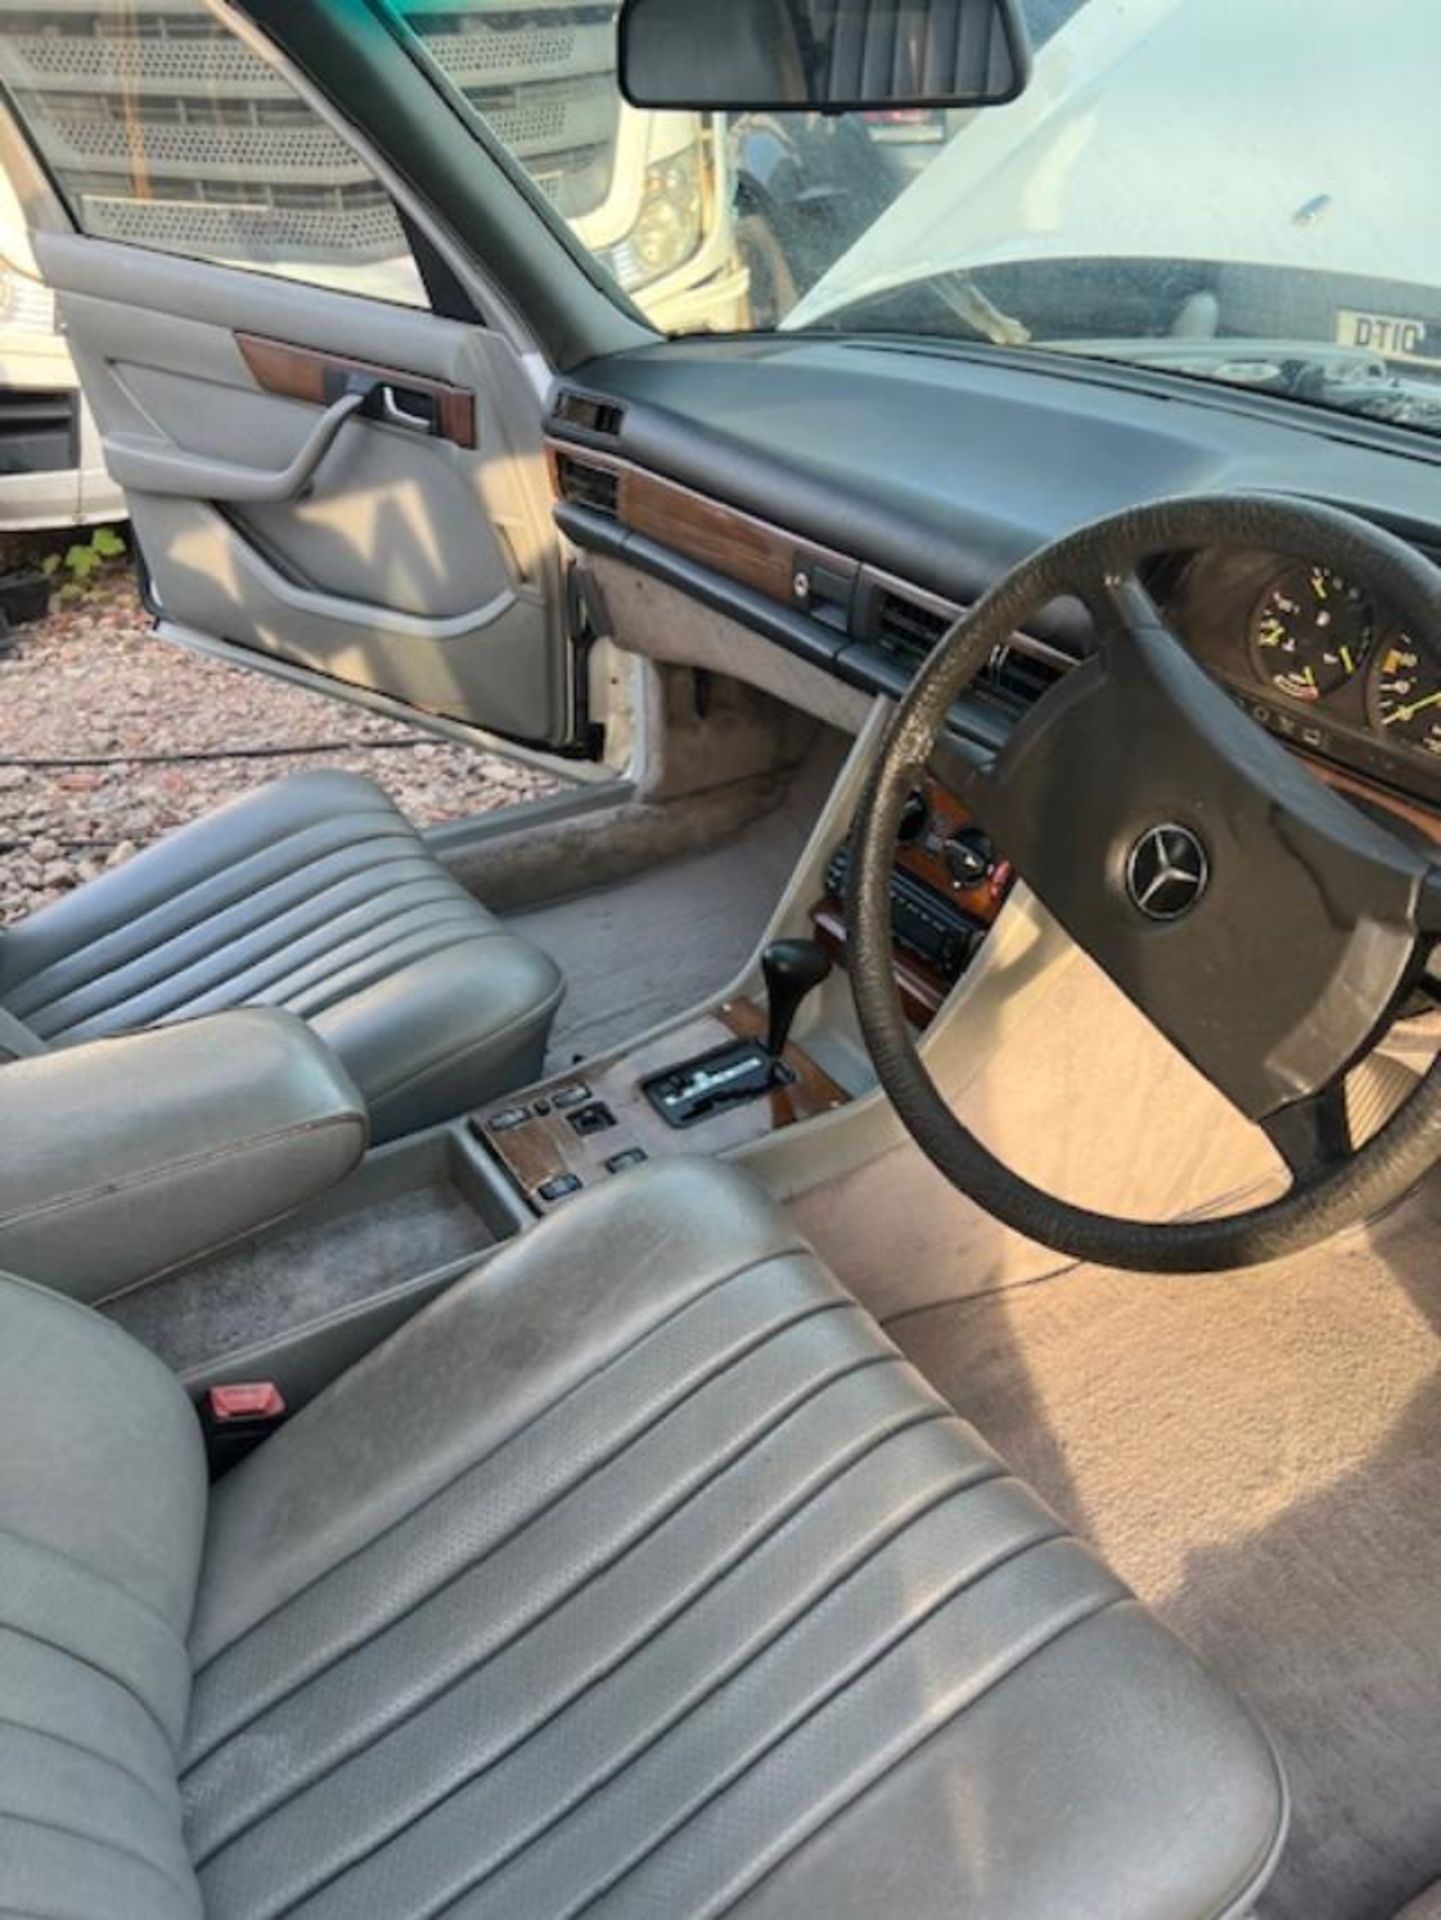 1989 Mercedes S300 SEL - Image 18 of 19